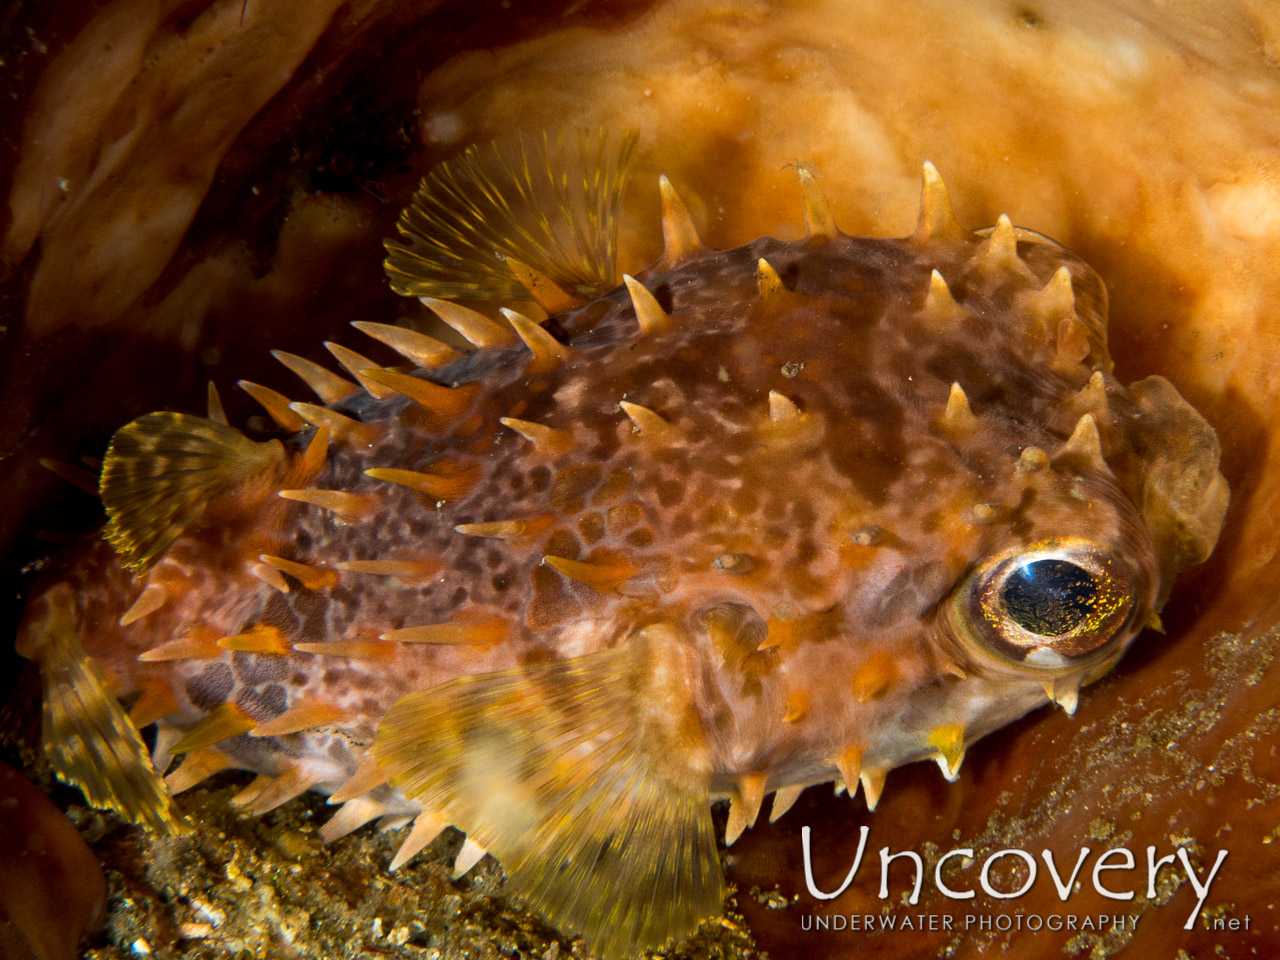 Porcupine Pufferfish (diodon Holocanthus) shot in Indonesia|North Sulawesi|Lembeh Strait|Nudi Retreat